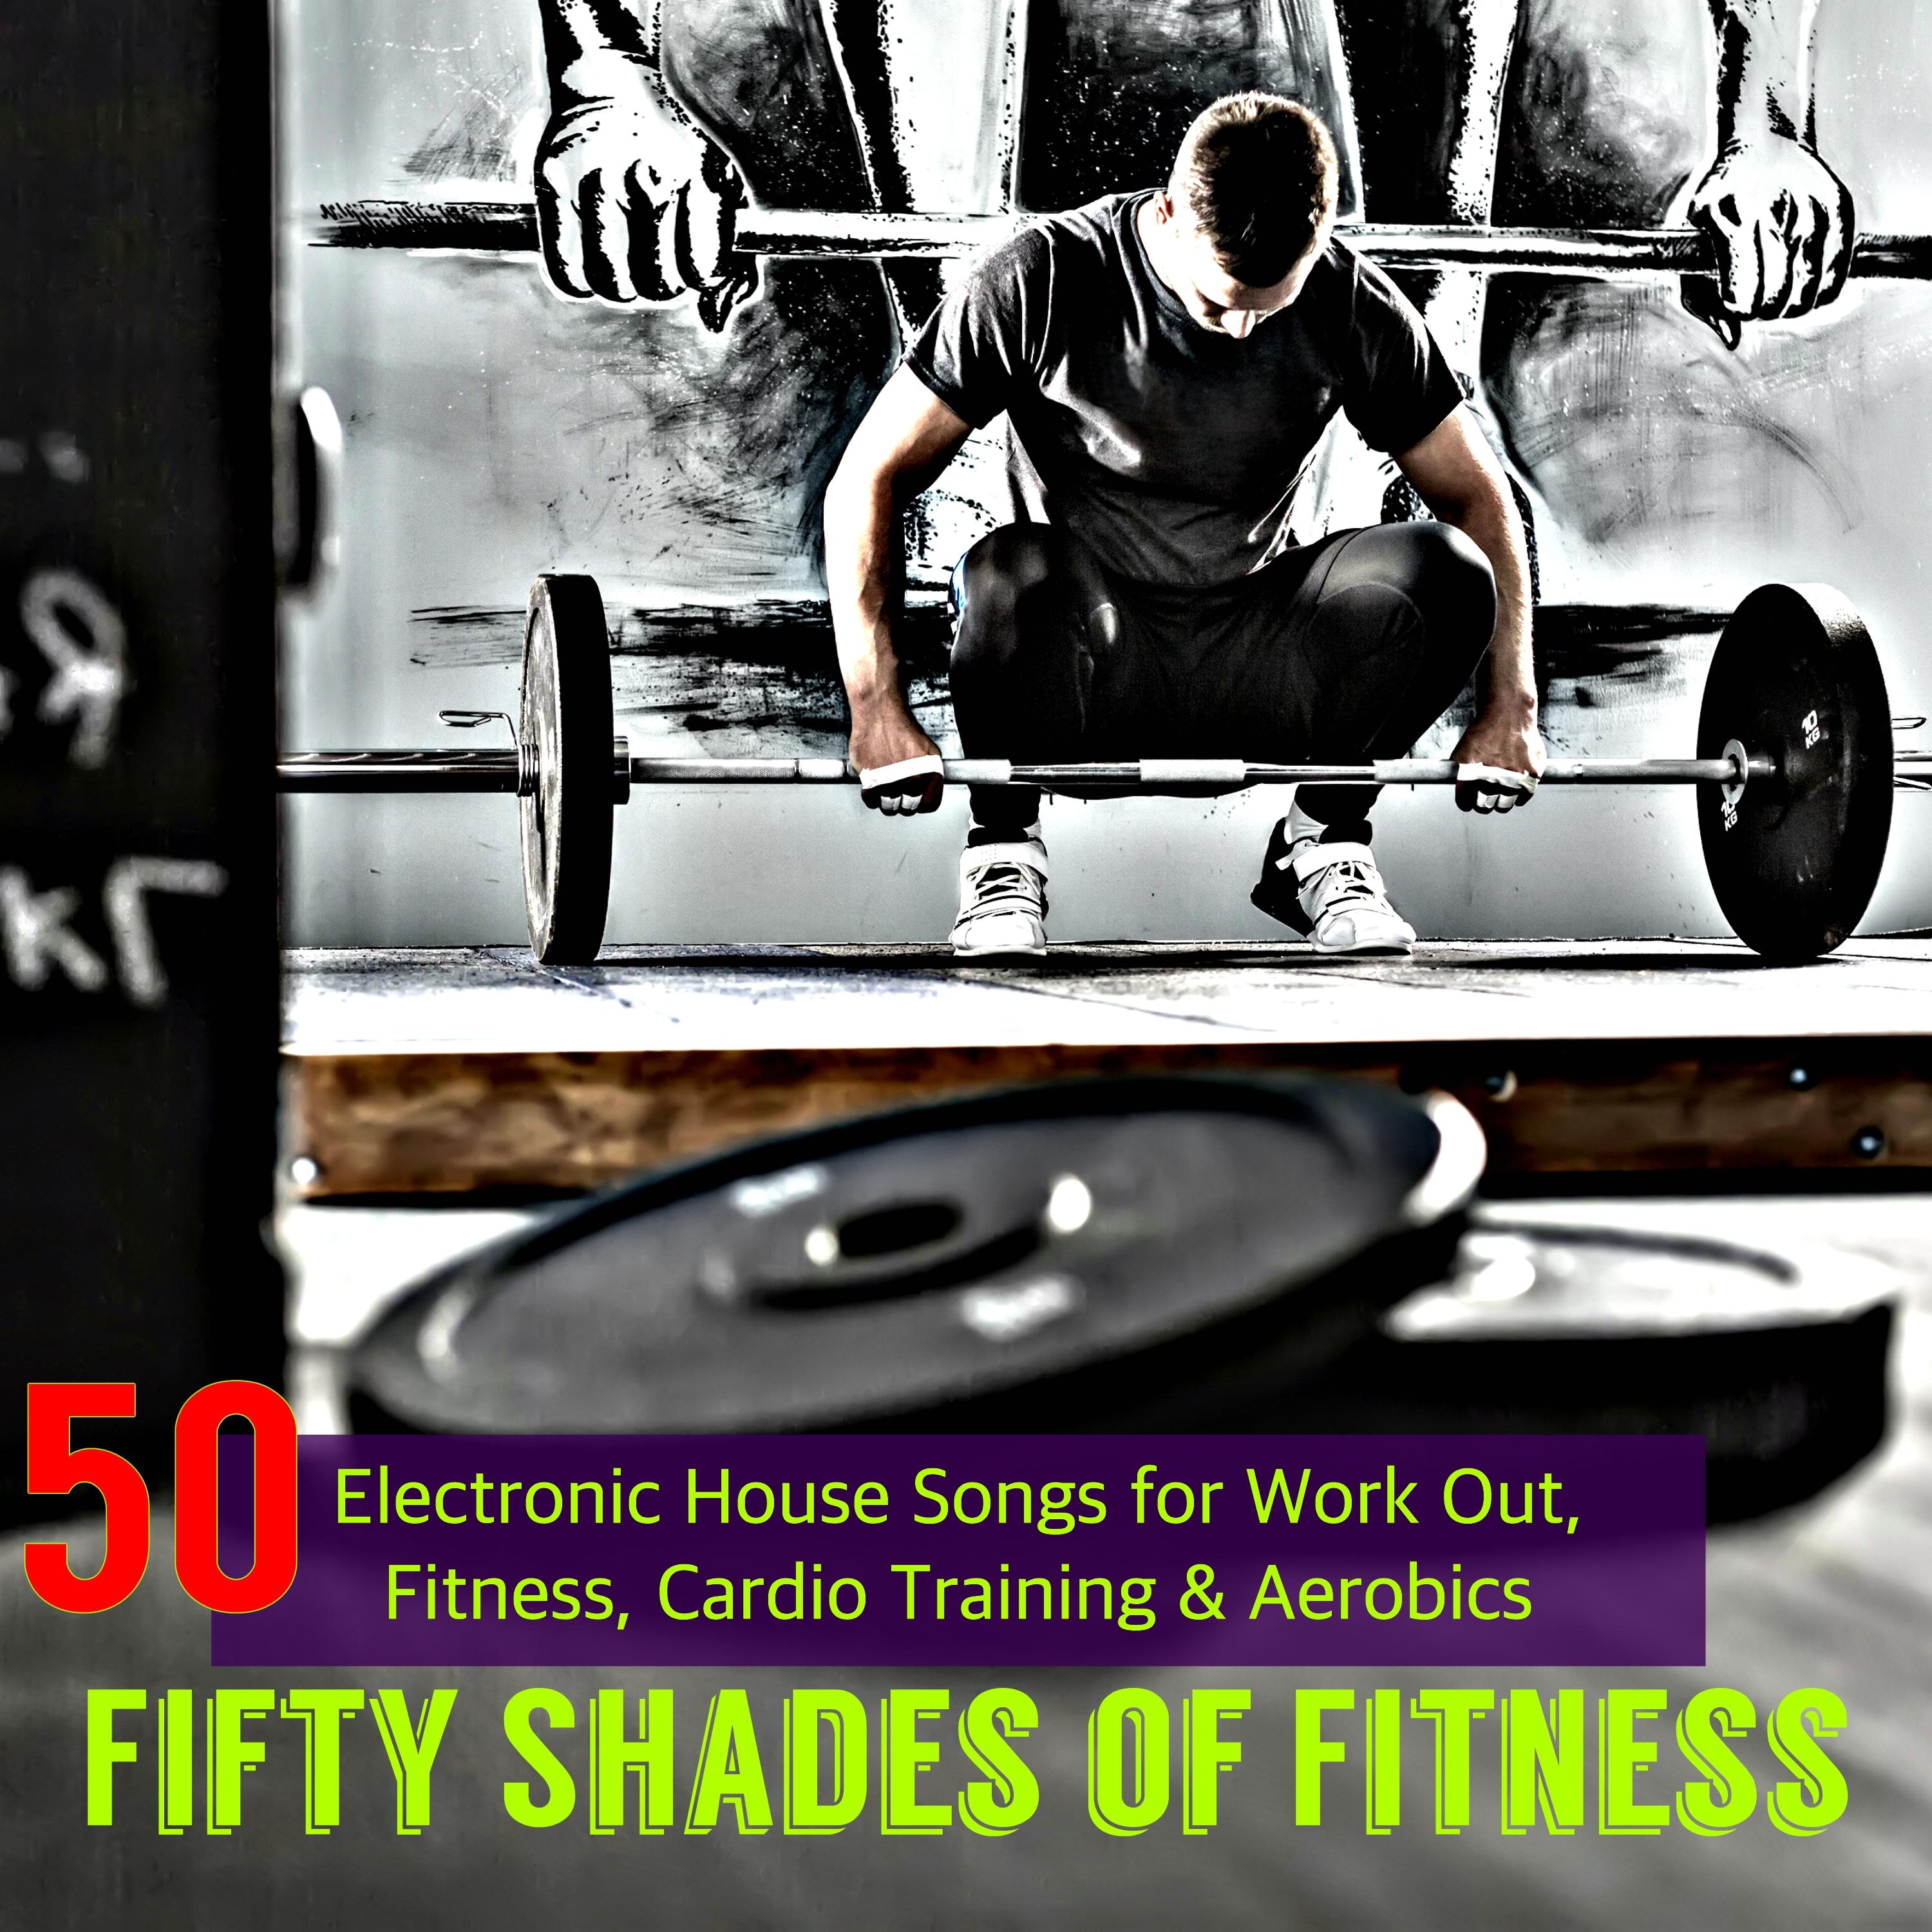 Fifty Shades of Fitness – 50 Electronic House Songs for Work Out, Fitness, Cardio Training & Aerobics